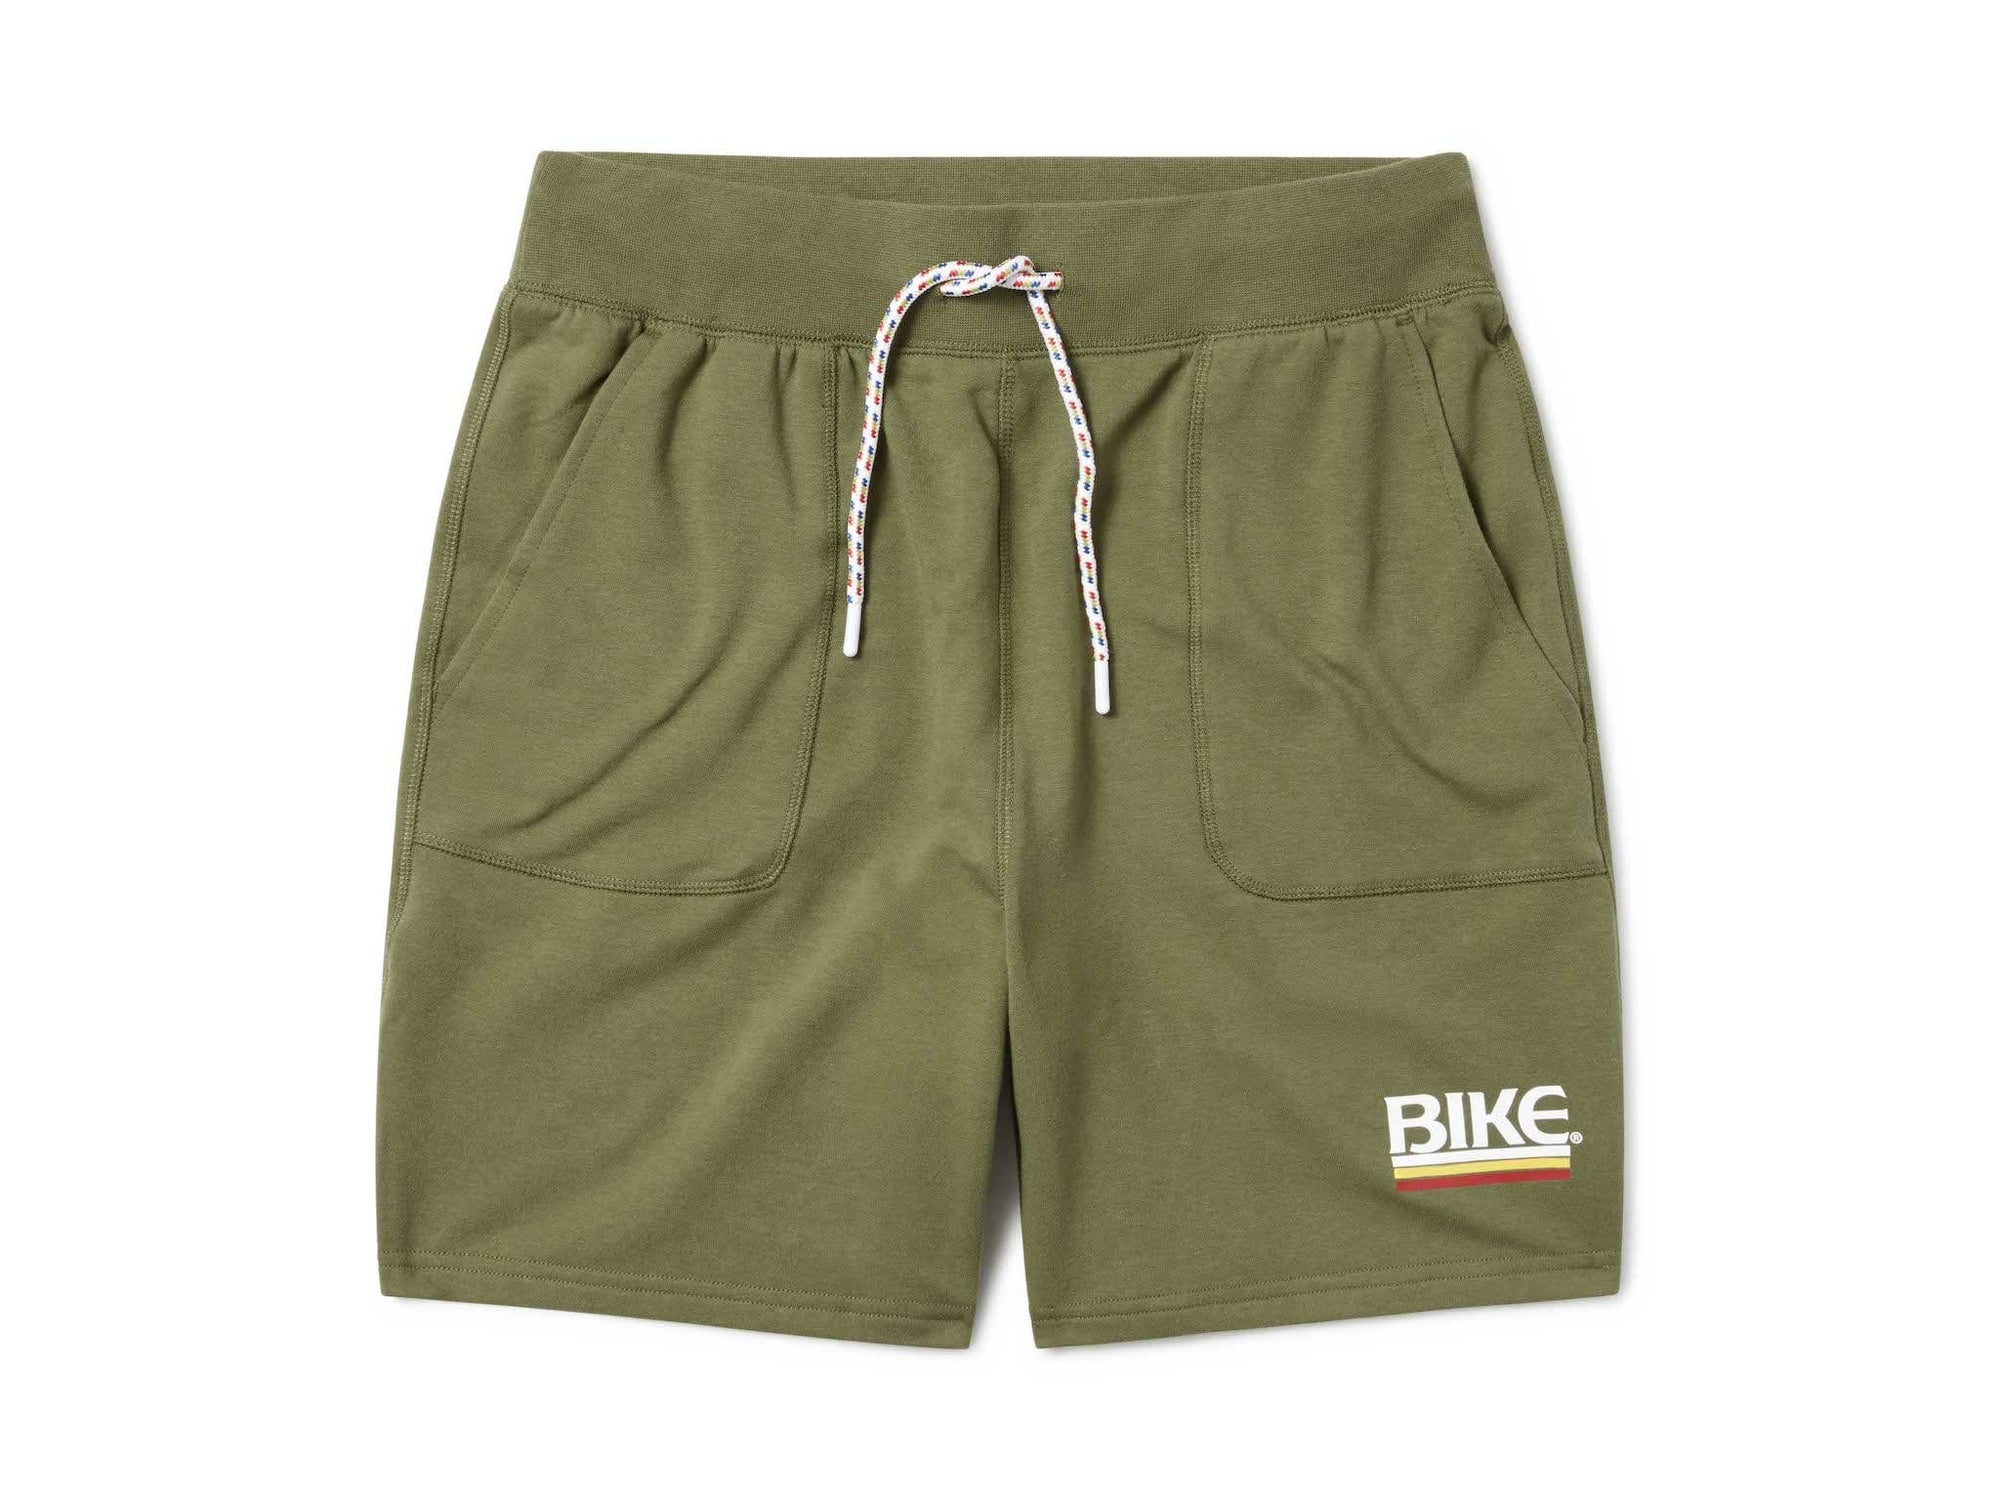 Men's French Terry Sweat Shorts - BIKE® Athletic